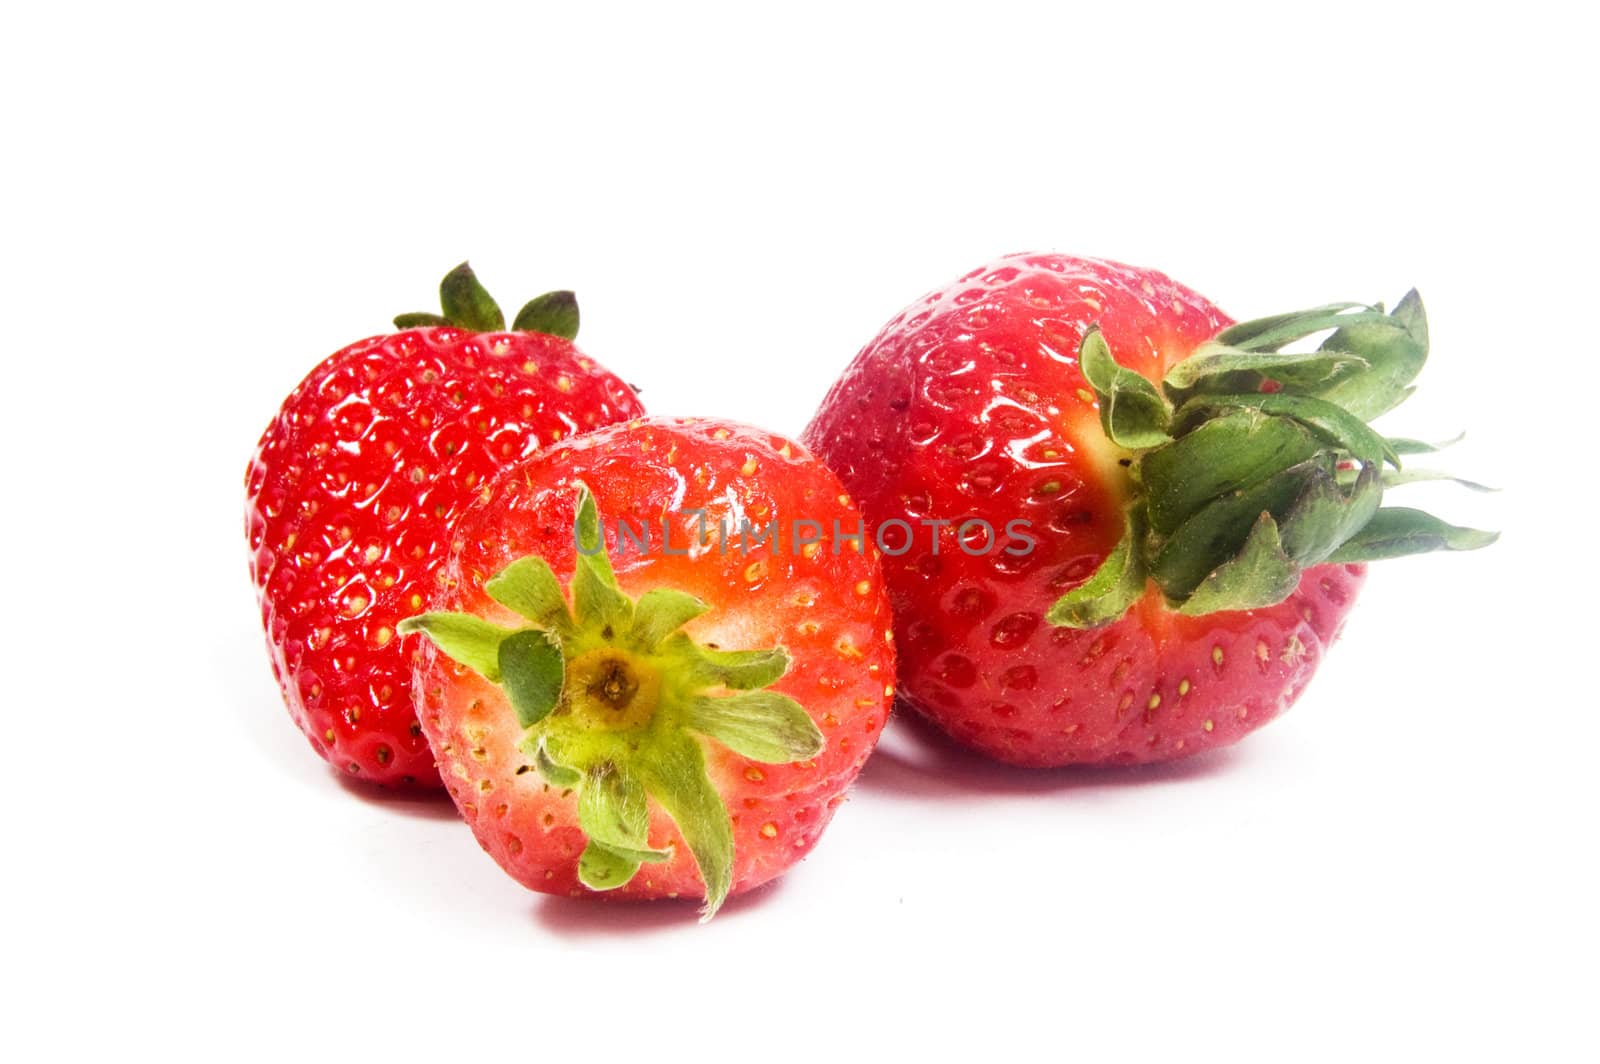 3 strawberries on a white background by ladyminnie